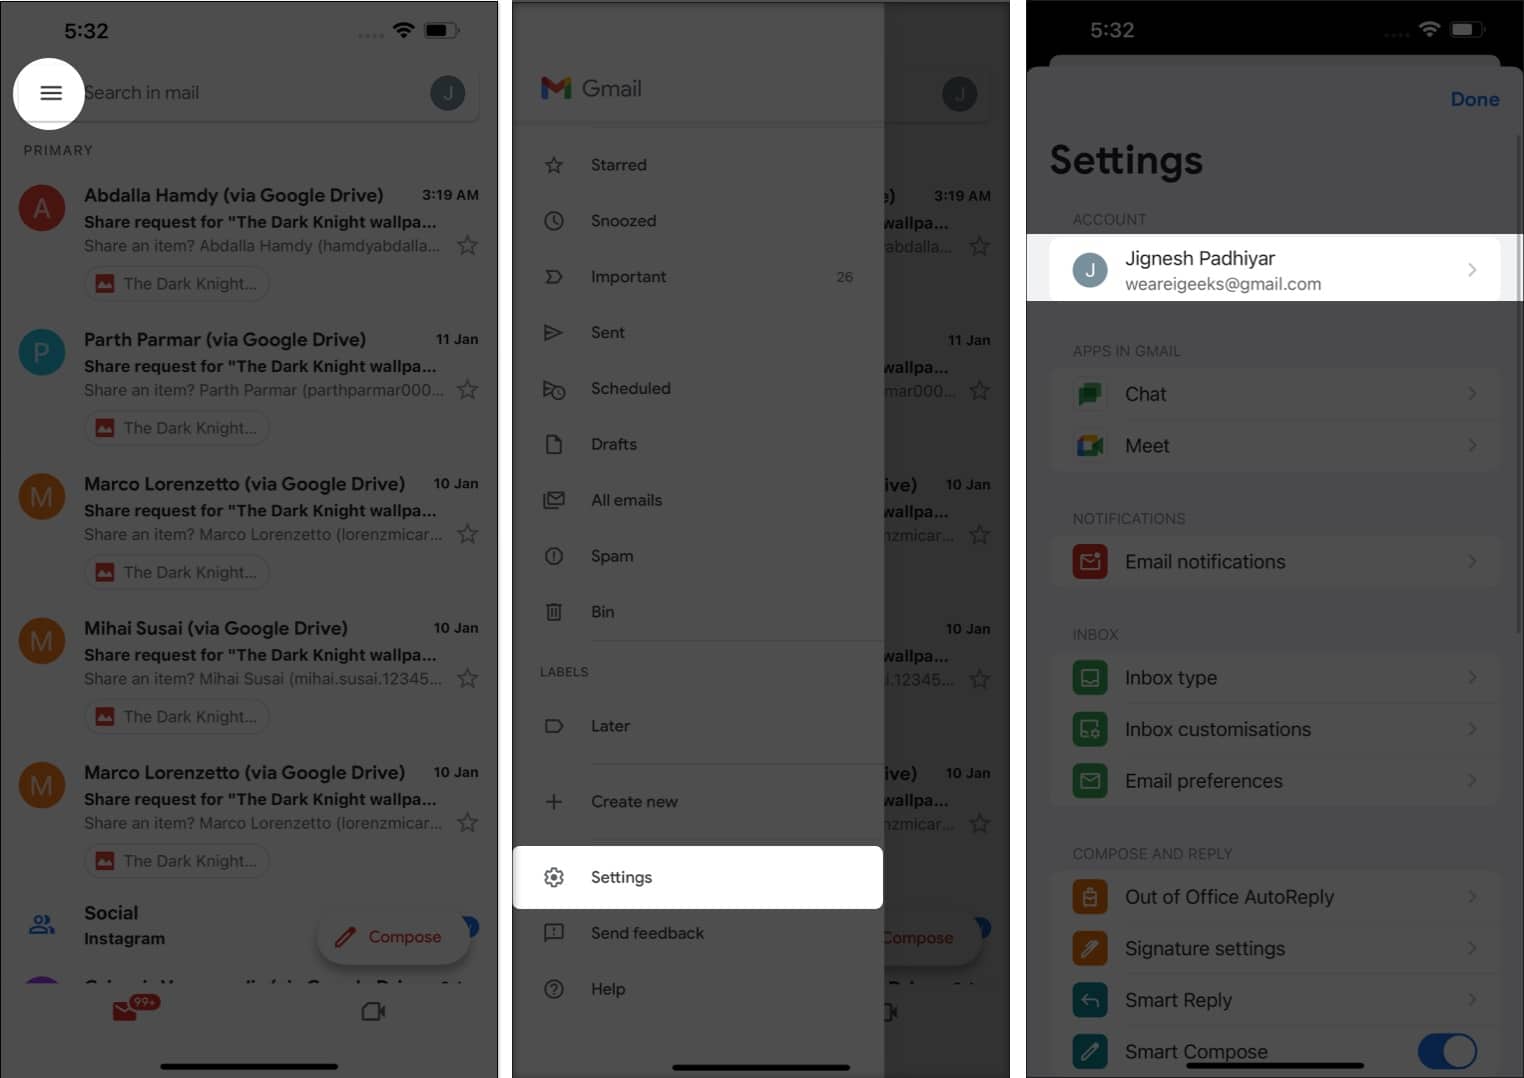 View the Google web and app activity from the Gmail app on iPhone